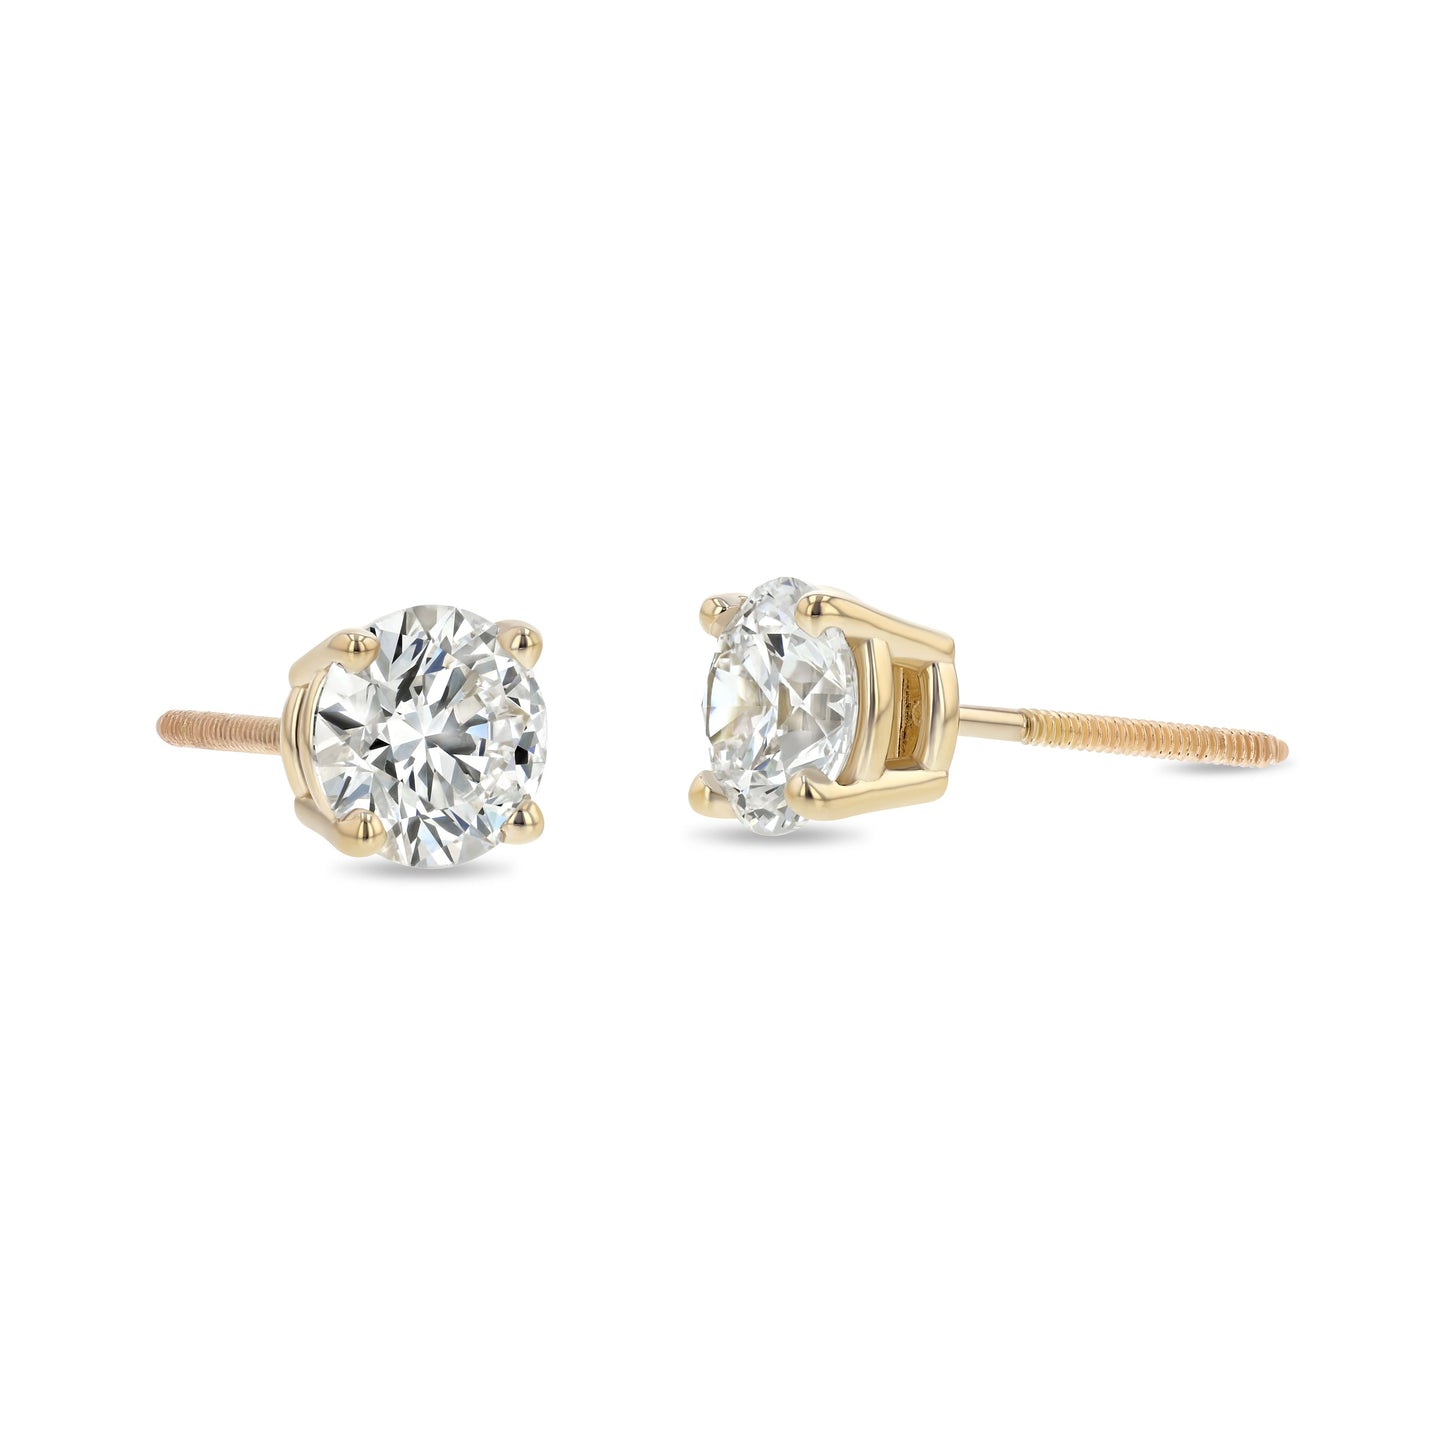 14k Yellow Gold 4-prong Round Diamond Stud Earrings 1/2ctw (4.0mm Ea), M-n Color, Si2-si3 Clarity